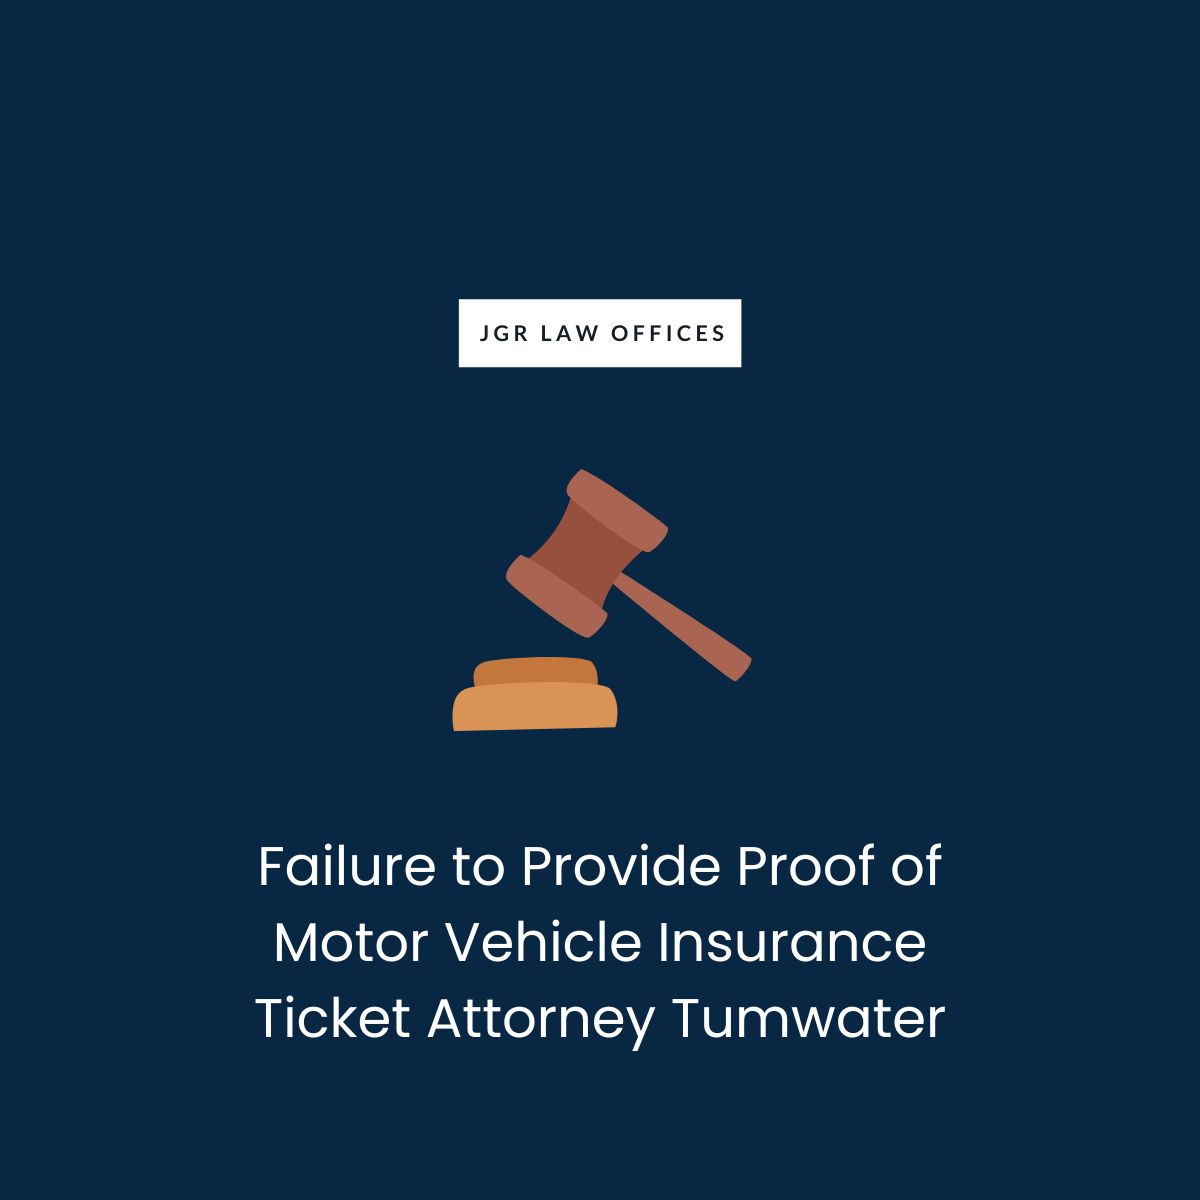 Failure to Provide Proof of Motor Vehicle Insurance Ticket Attorney Tumwater